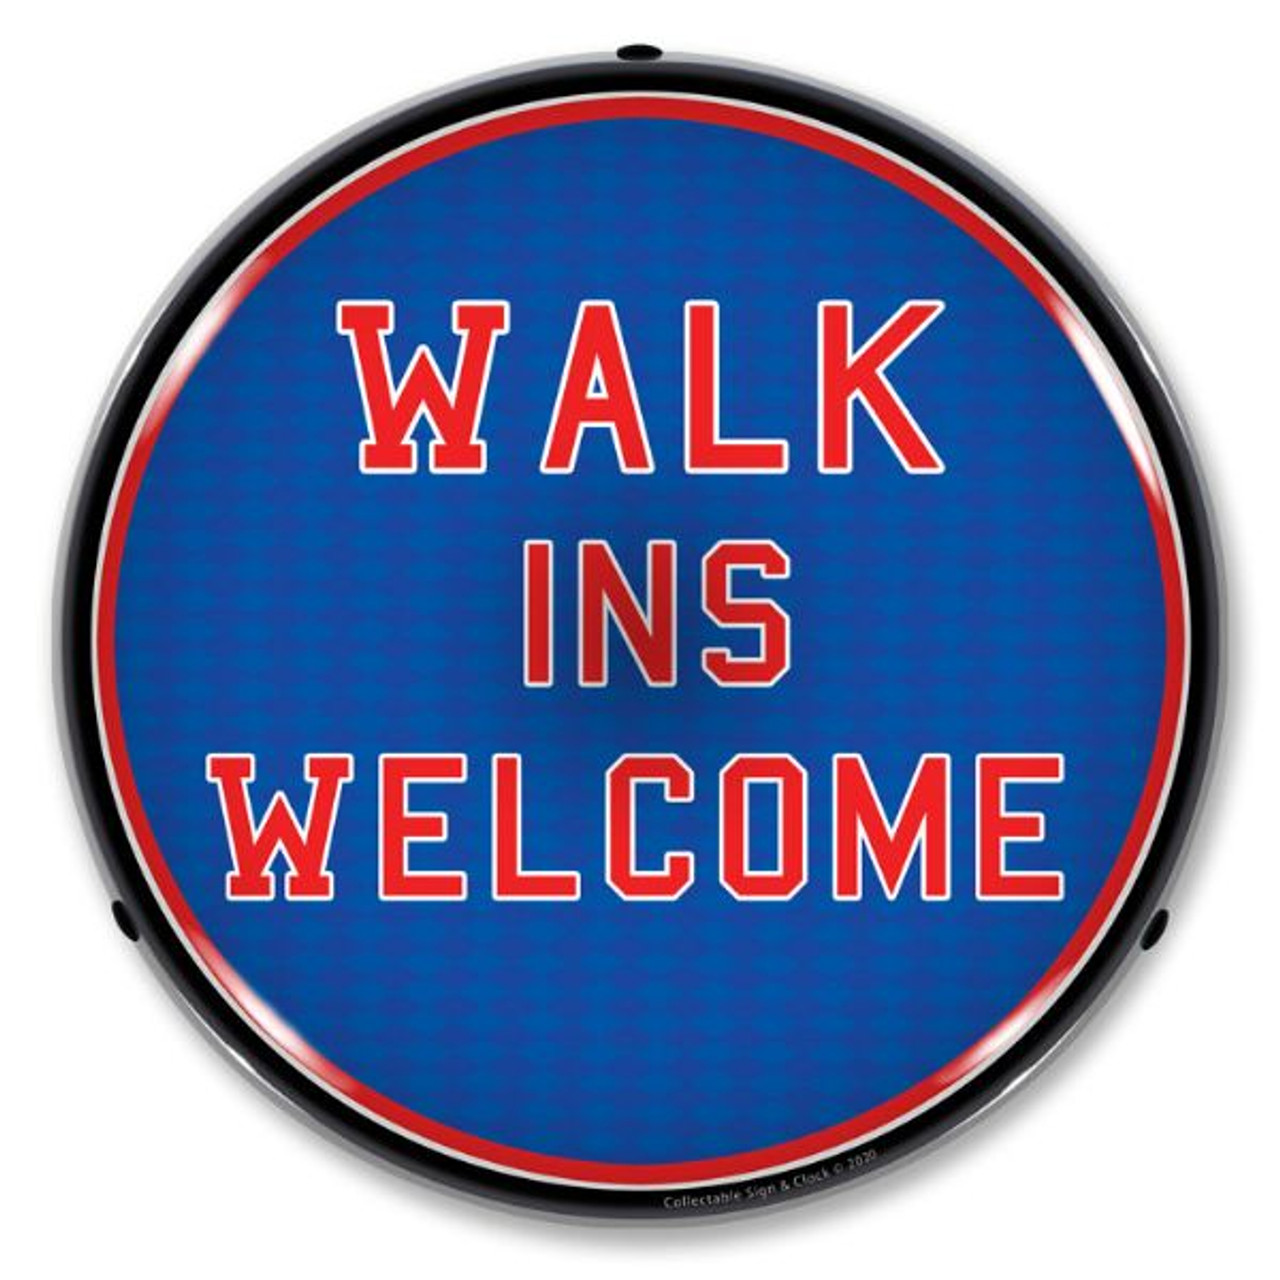 Walk Ins Welcome LED Lighted Business Sign 14 x 14 Inches